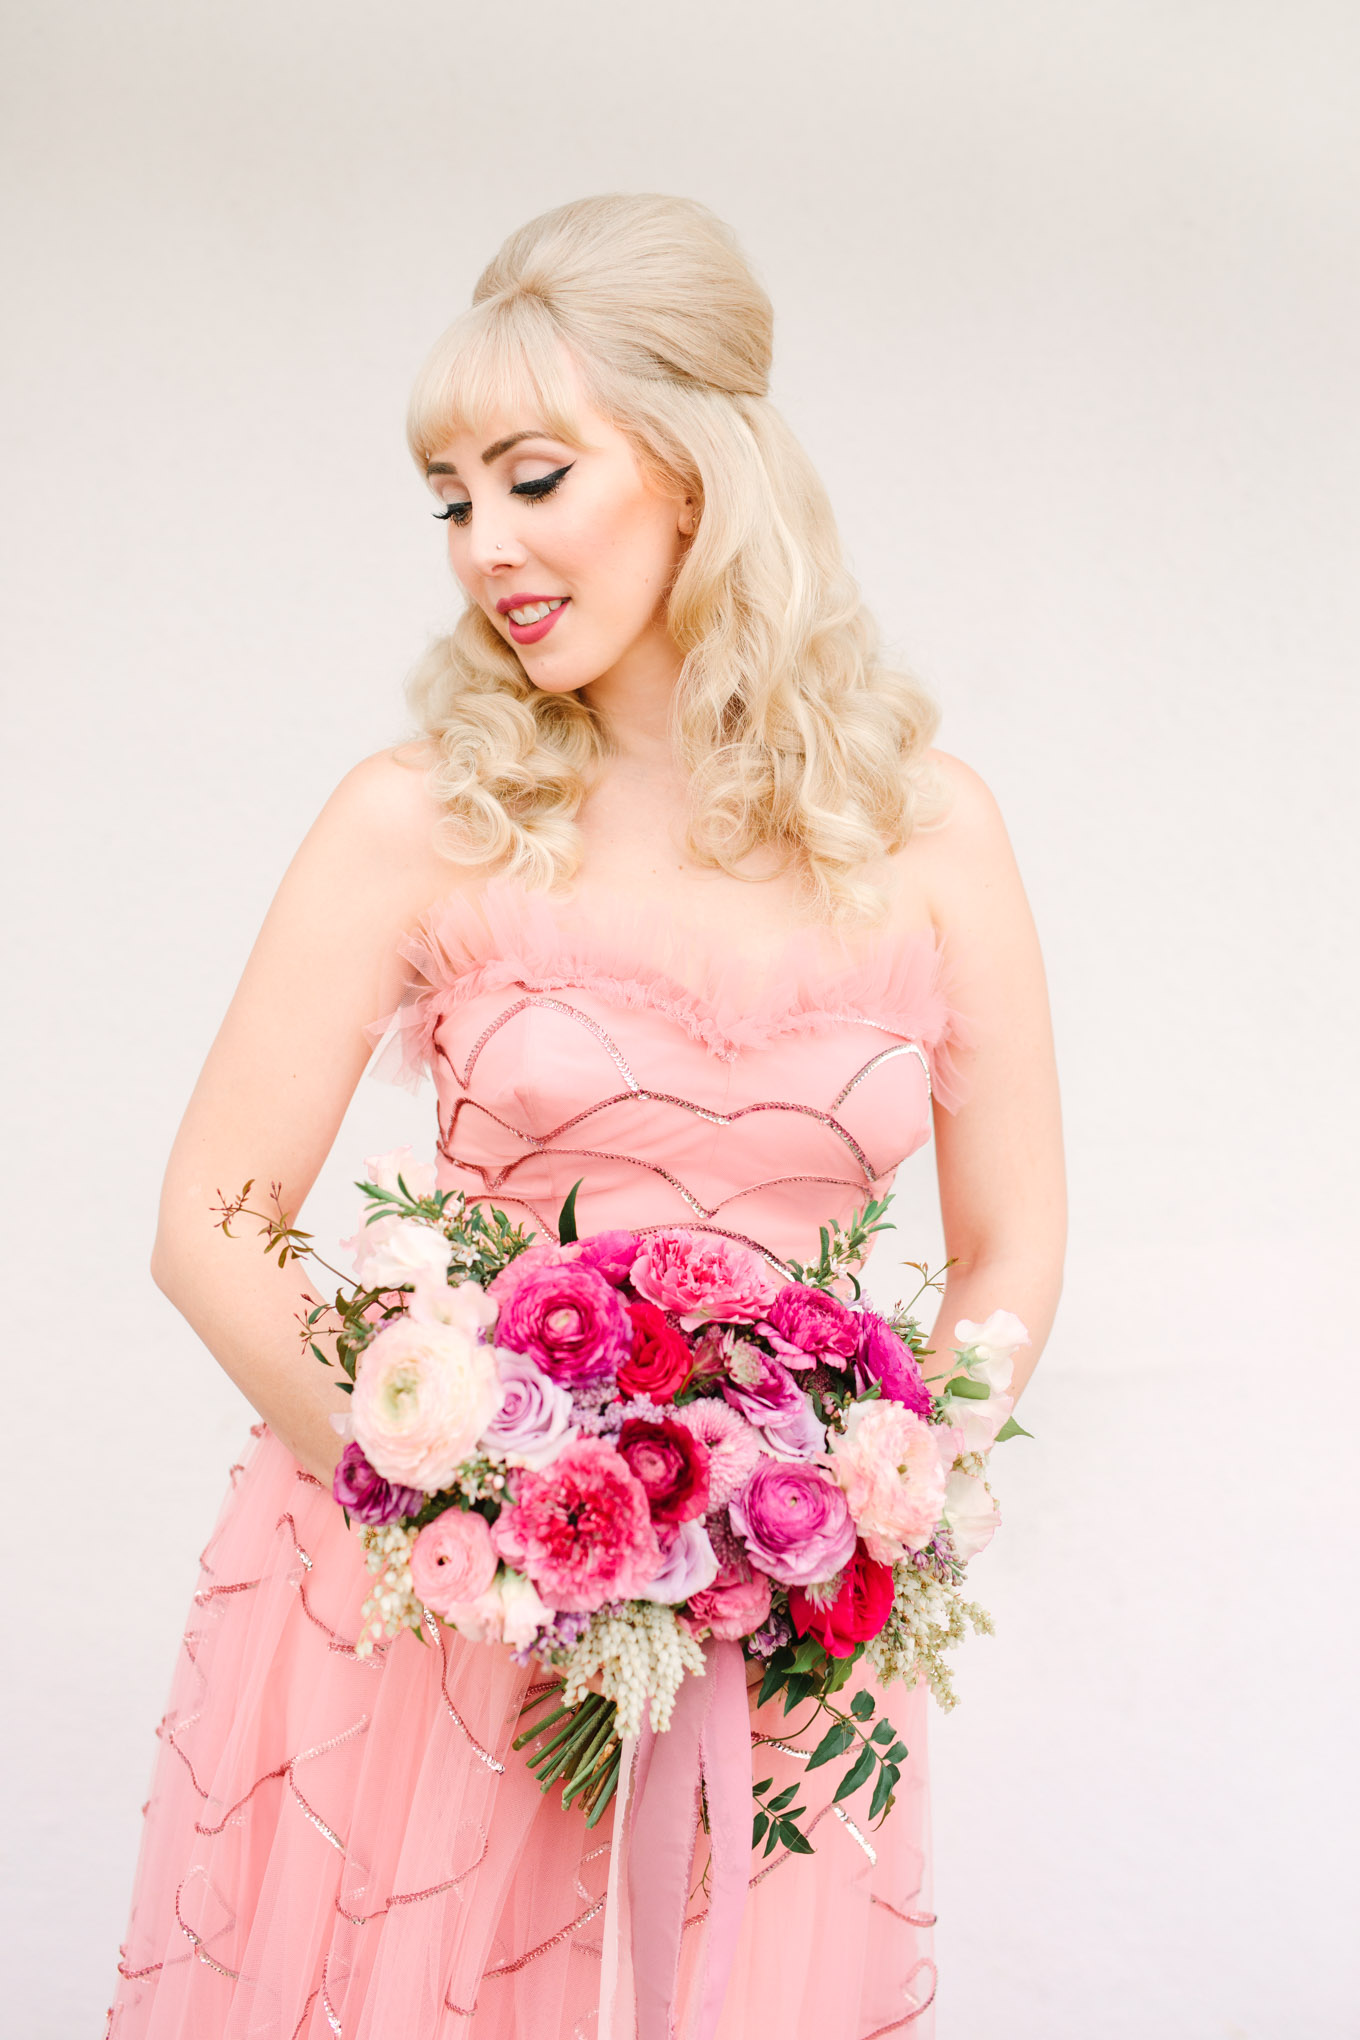 Retro bride in pink vintage gown. Modern vintage-inspired Palm Springs engagement session with a 1960s pink Cadillac, retro clothing, and flowers by Shindig Chic. | Colorful and elevated wedding inspiration for fun-loving couples in Southern California | #engagementsession #PalmSpringsengagement #vintageweddingdress #floralcar #pinkcar   Source: Mary Costa Photography | Los Angeles